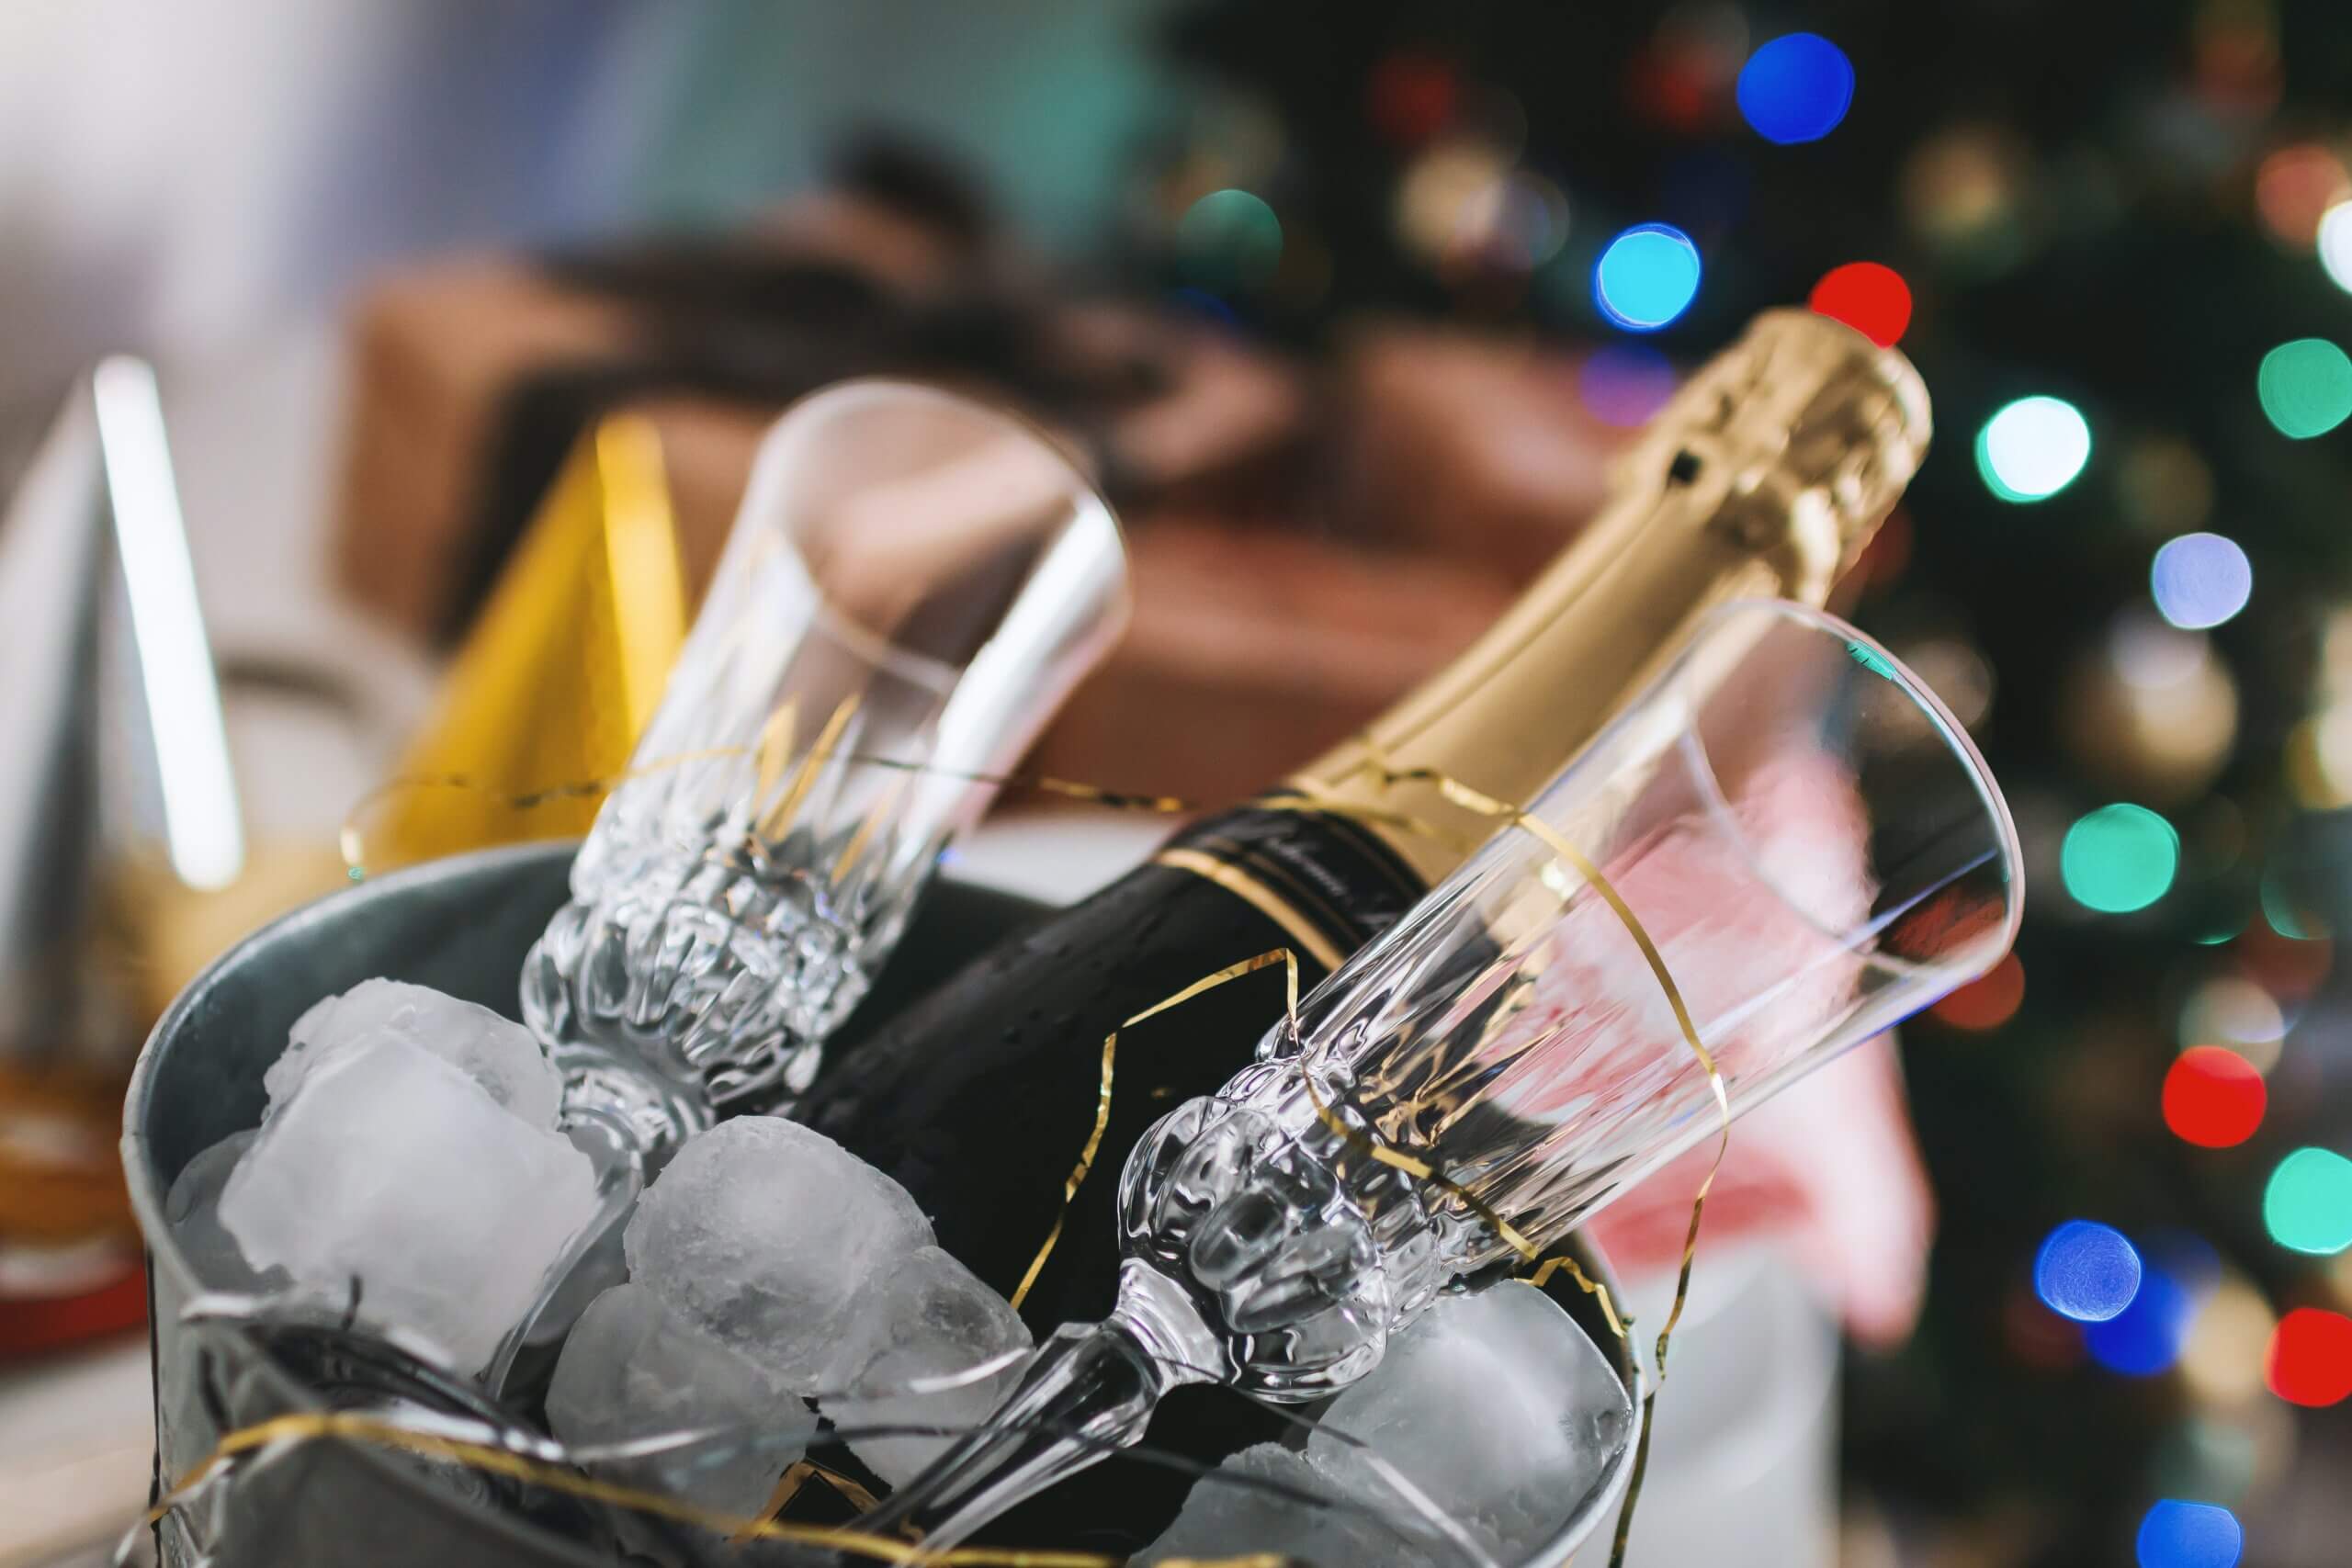 7 Things to Keep in Mind When Planning a Company Holiday Party